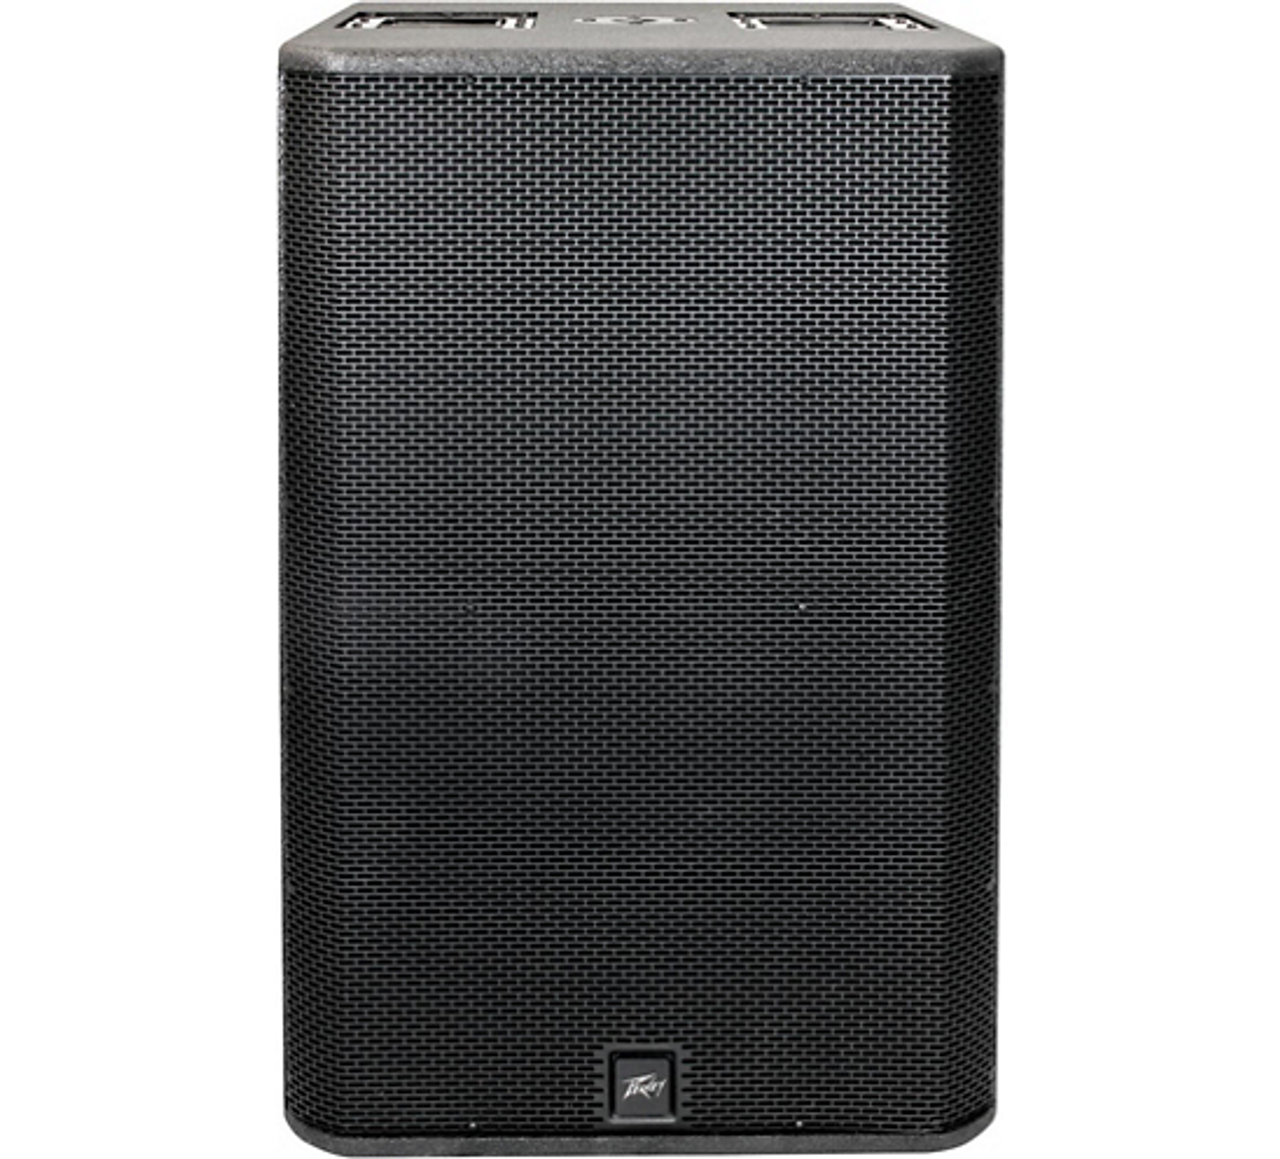 Peavey RBN 118 Sub 18" 2000 Watt Active Powered Subwoofer 9-band EQ, Onboard DSP, 2 Combo Inputs, and 2 XLR Outputs